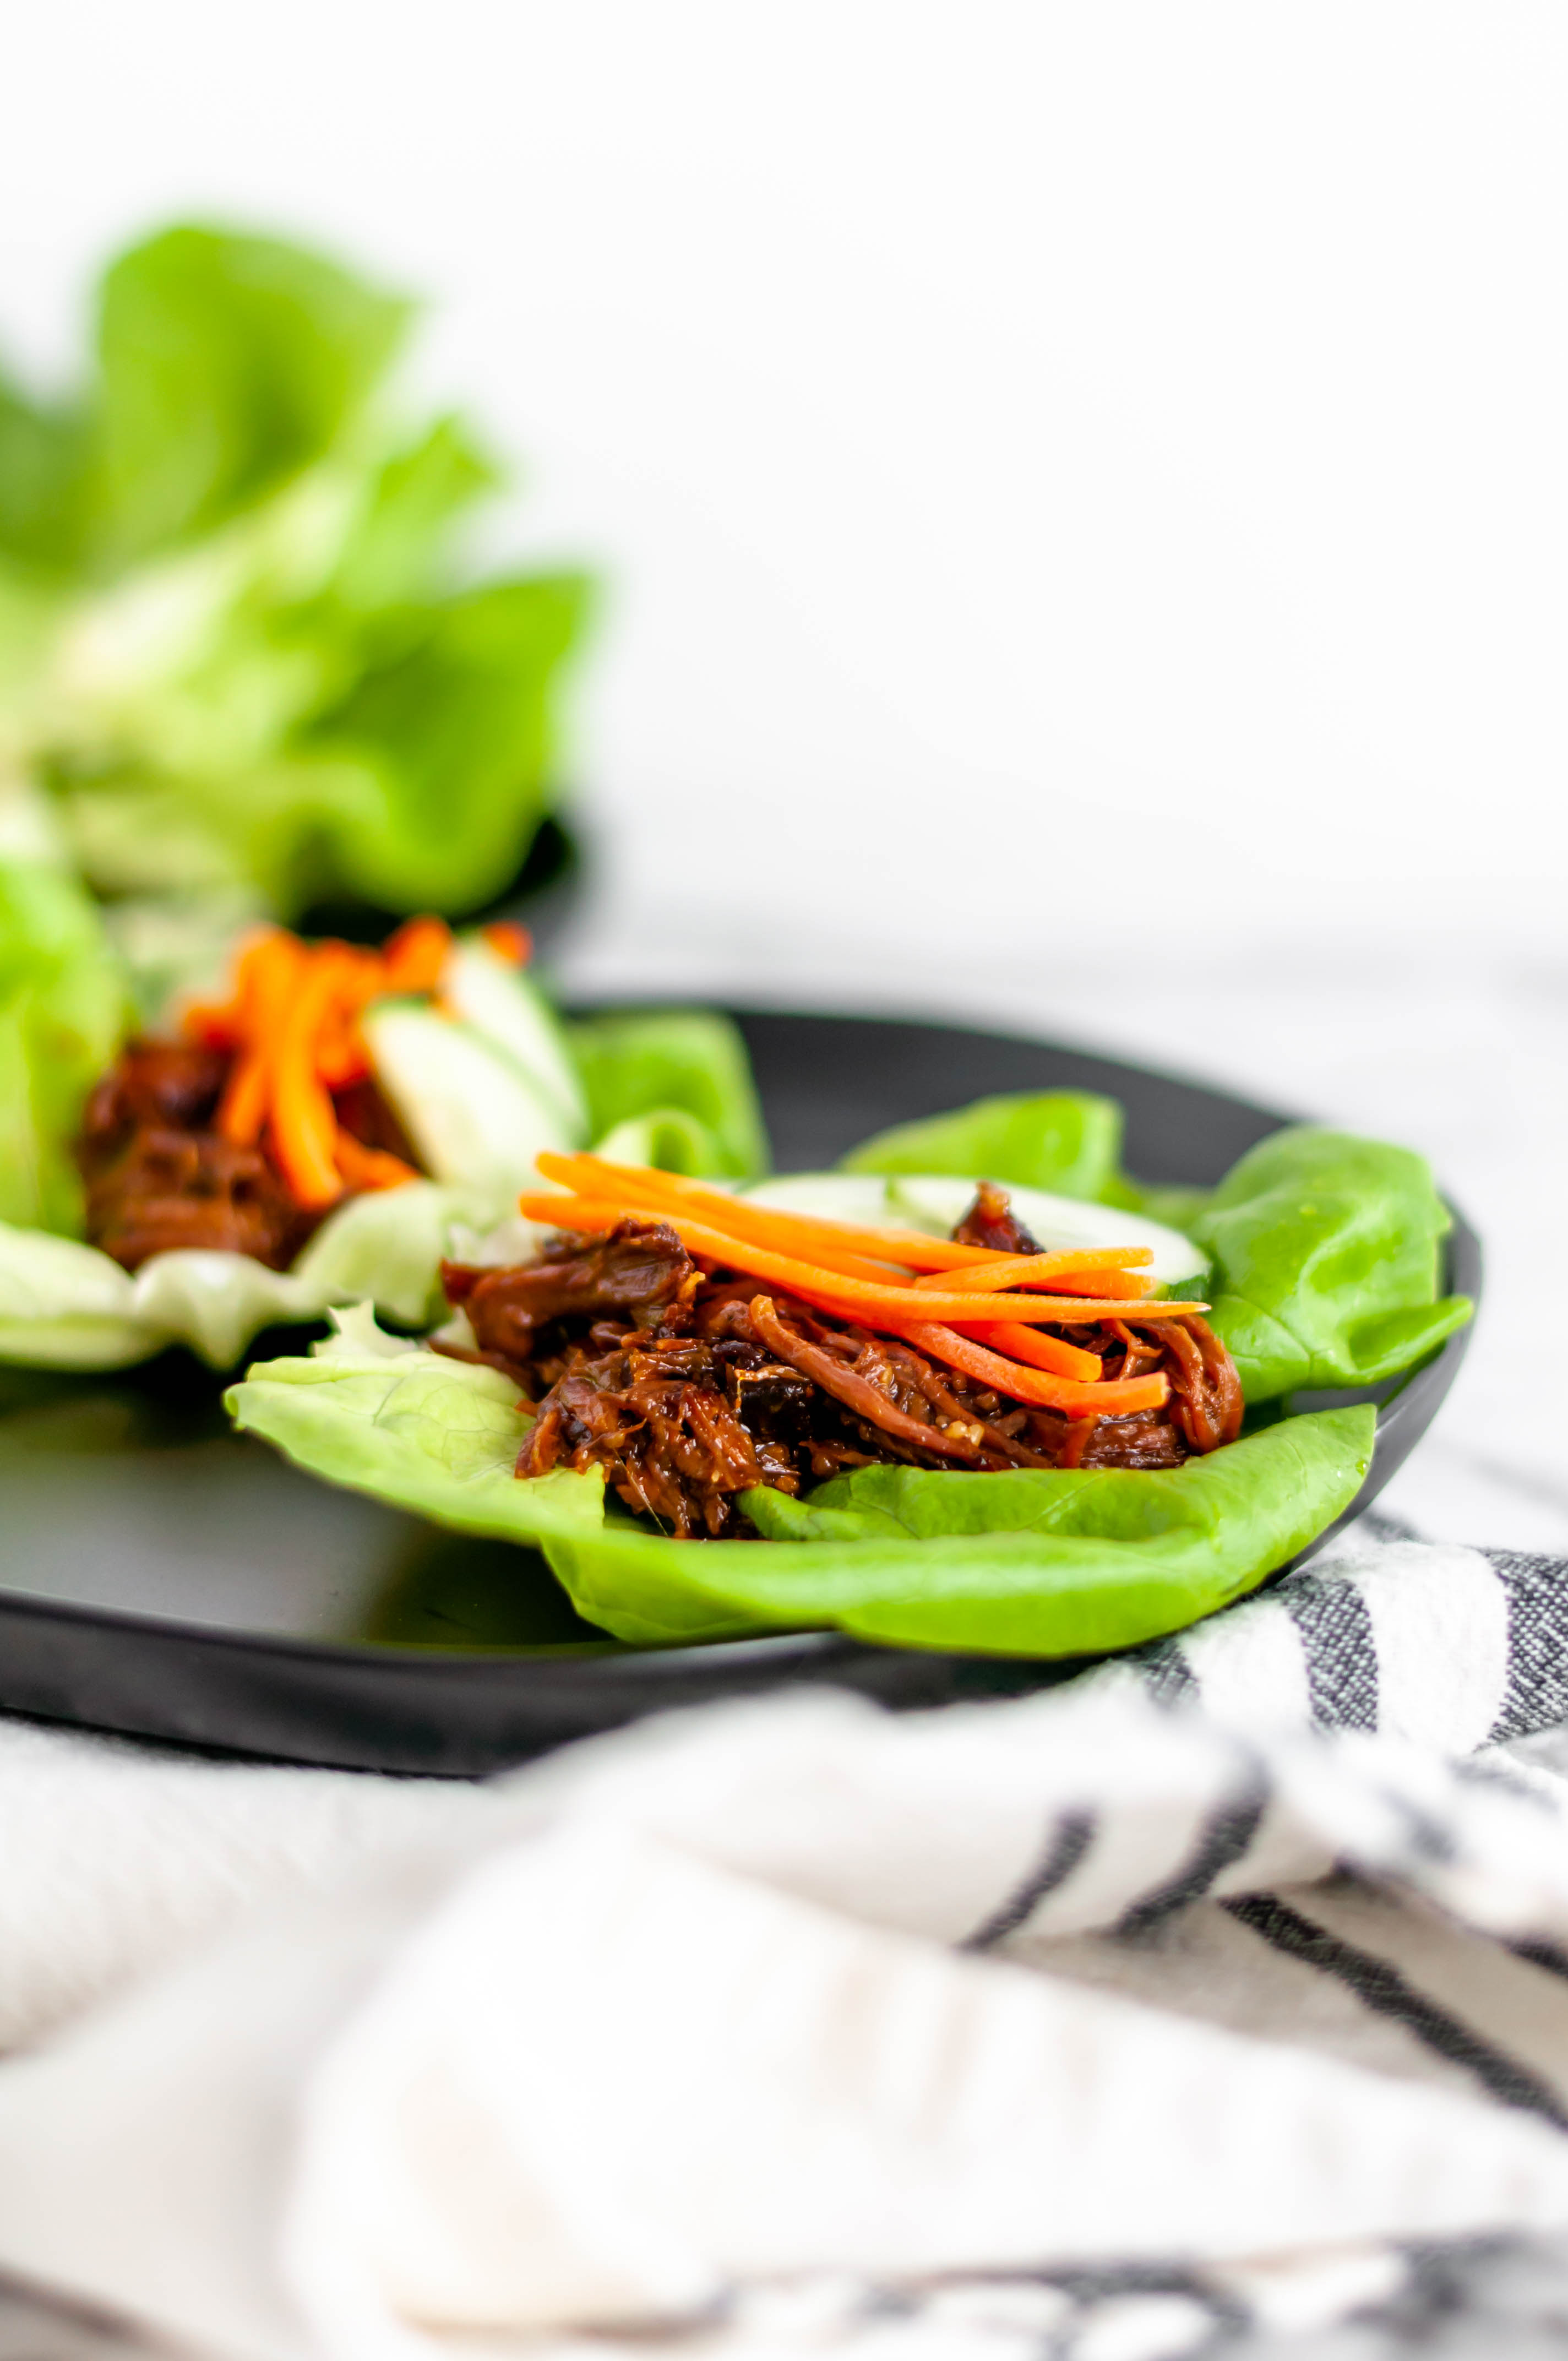 Slow Cooker Asian Beef Lettuce Wraps is the easiest kind of recipe. Everything in the slow cooker then serve in lettuce wraps with crunchy toppings.